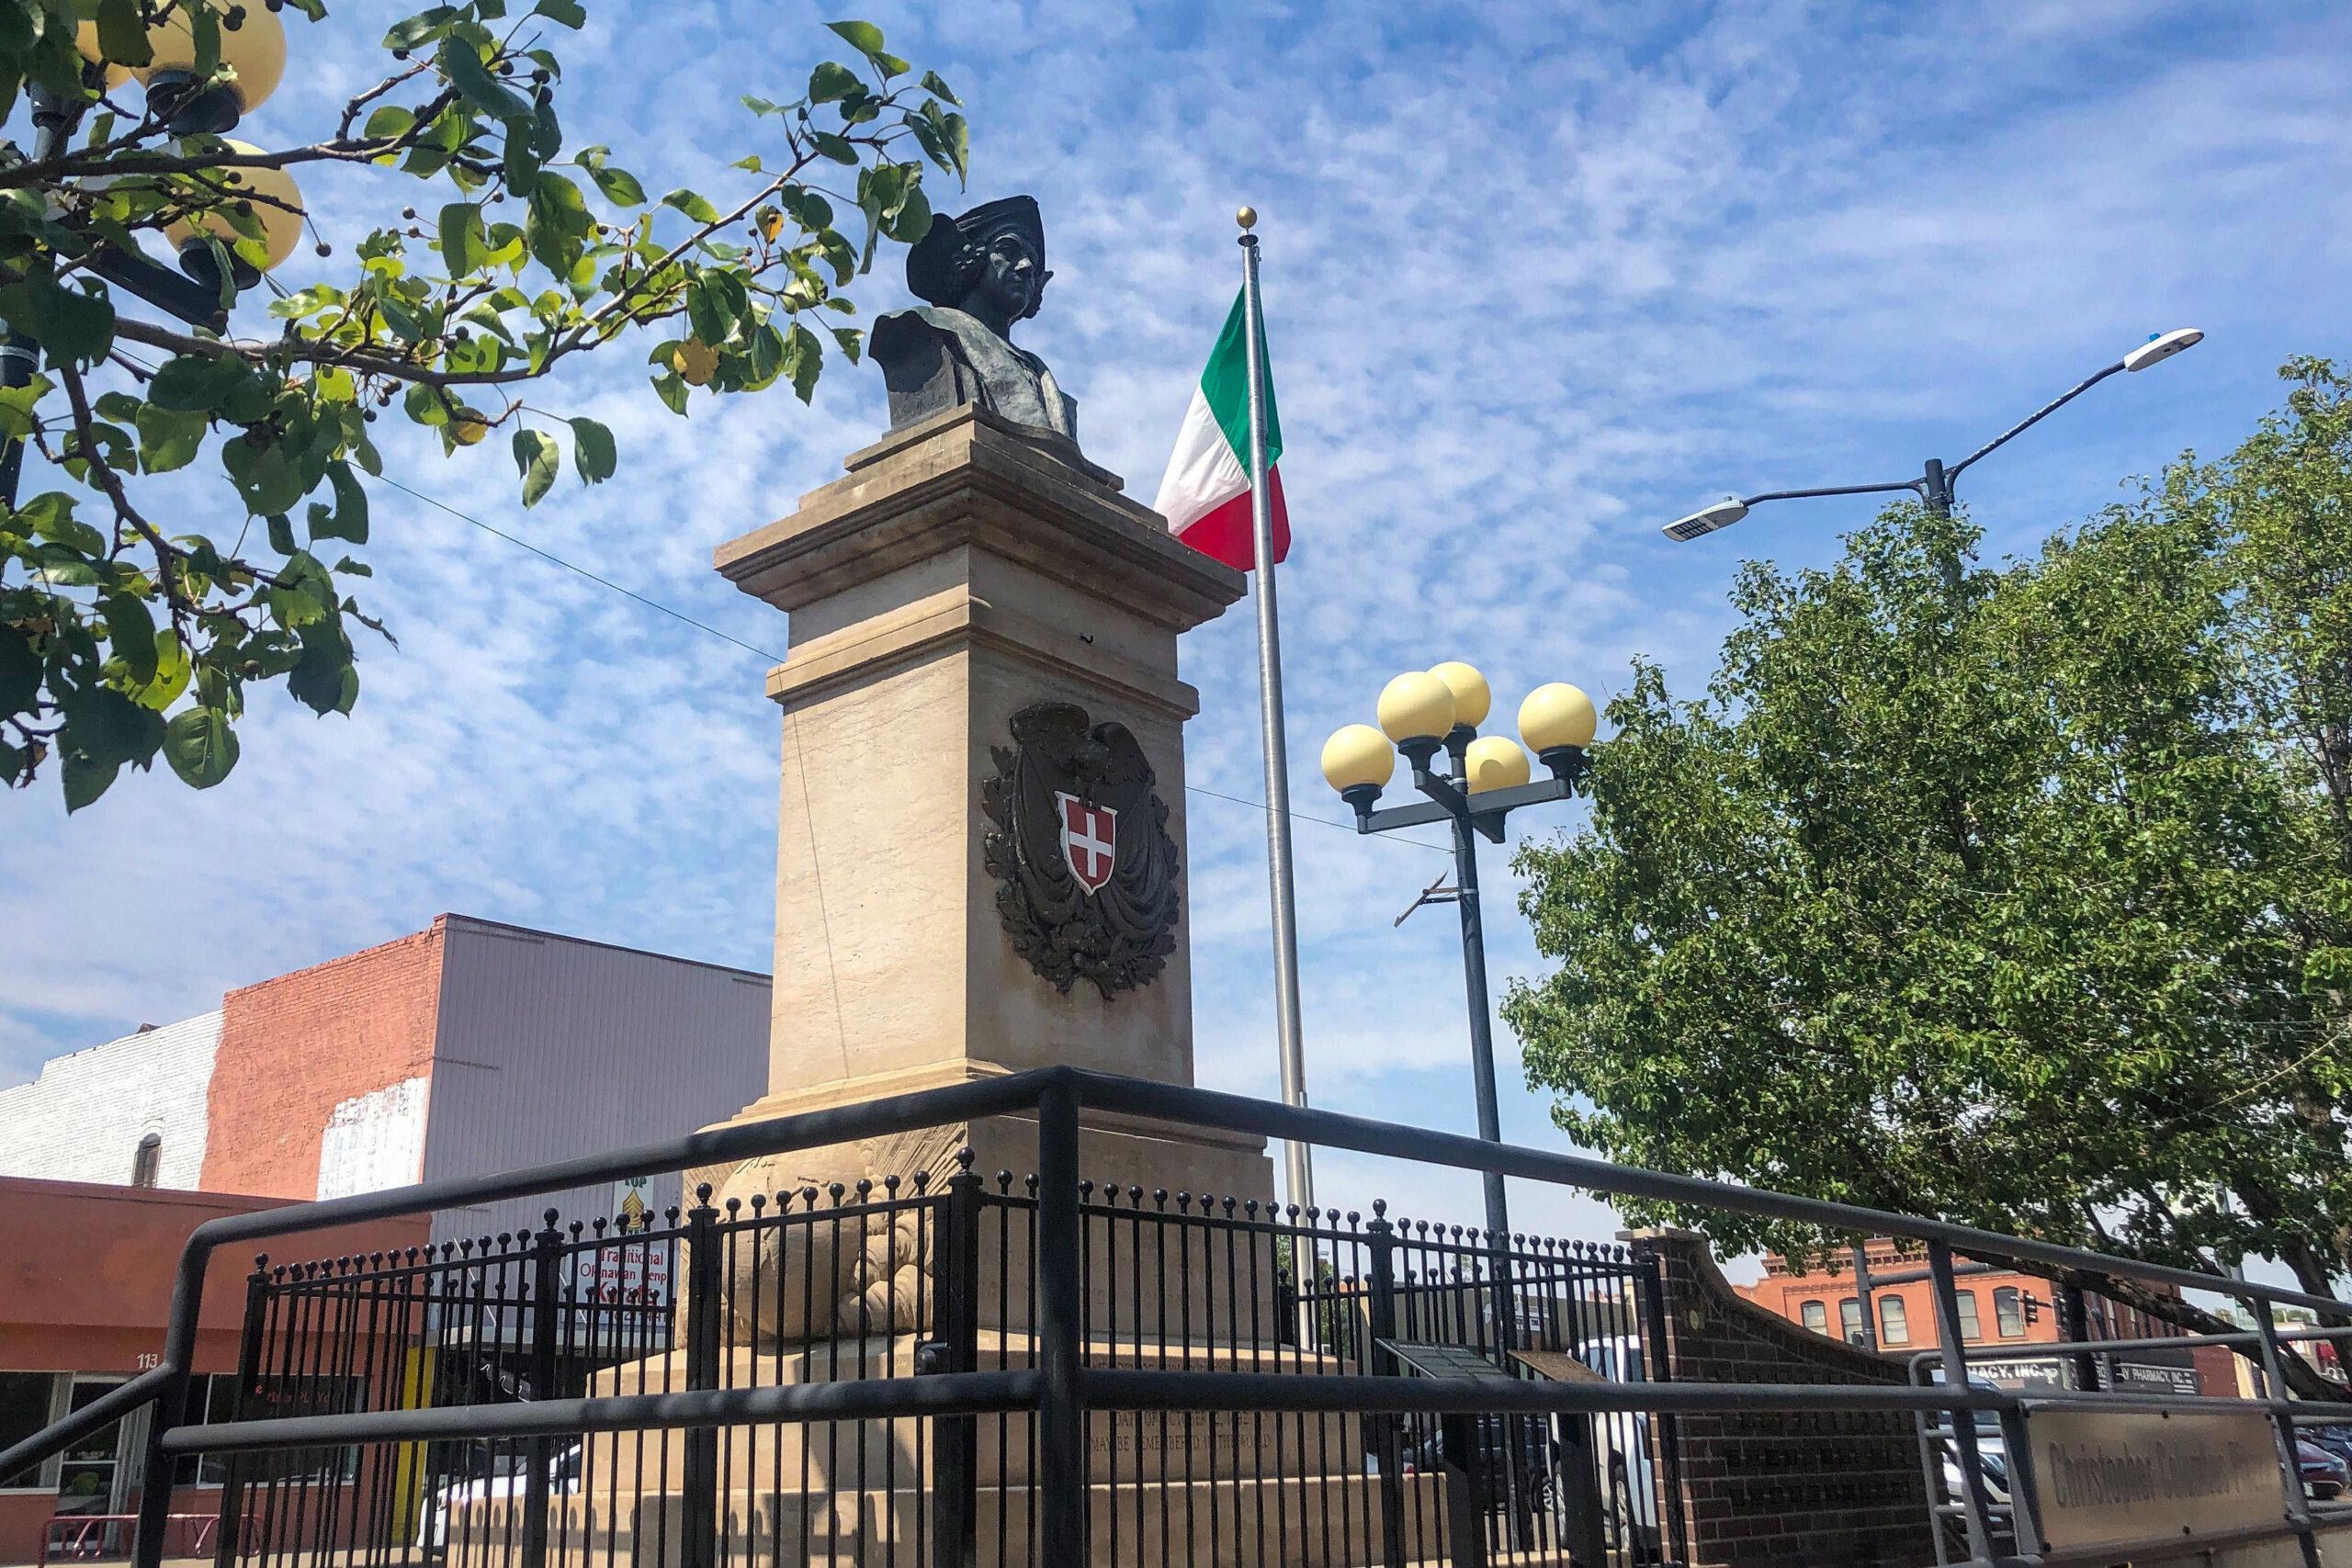 A view of the Christopher Columbus memorial in downtown Denver. A bronze bust of the explorer sits on top of a high stone pedestal, with an Italian flag in the background.